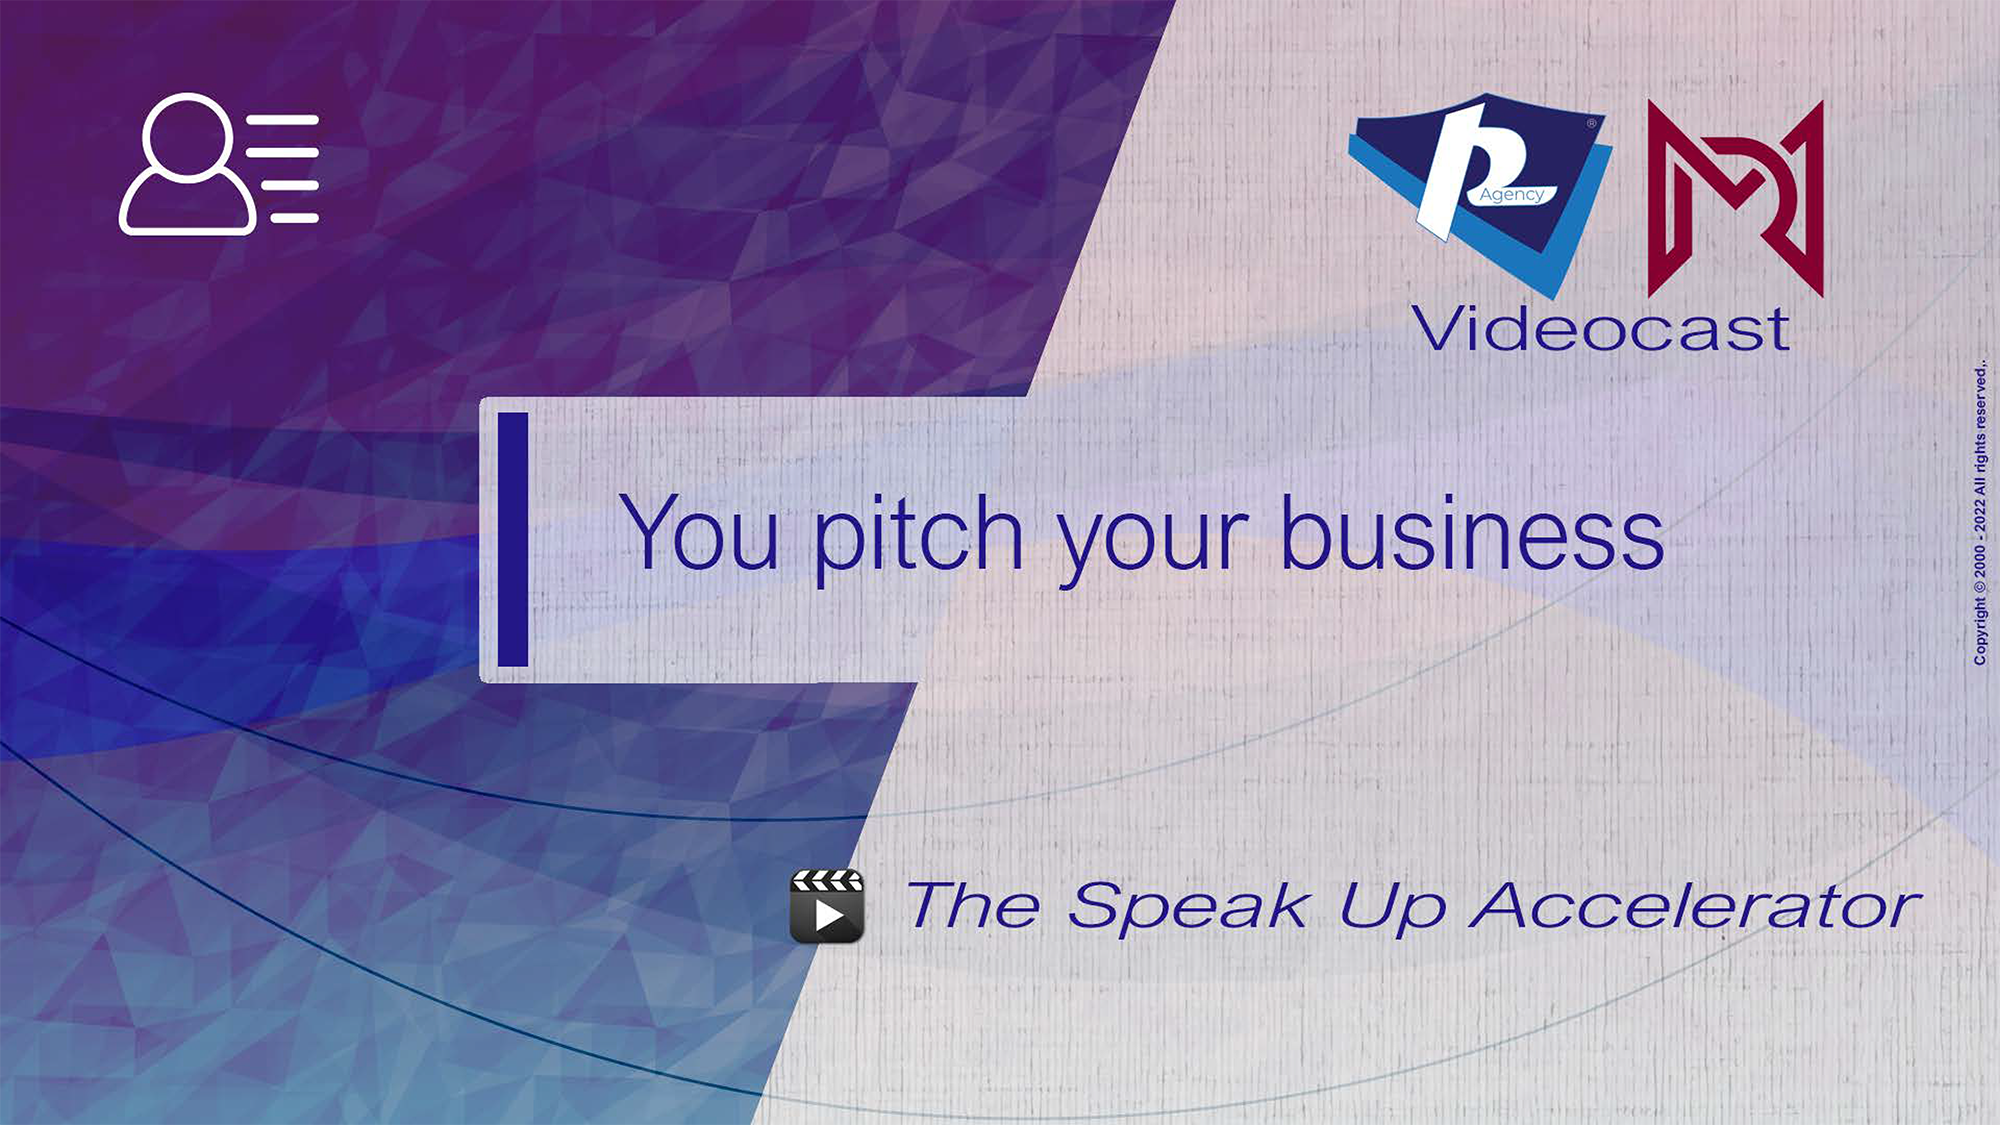 You pitch your business